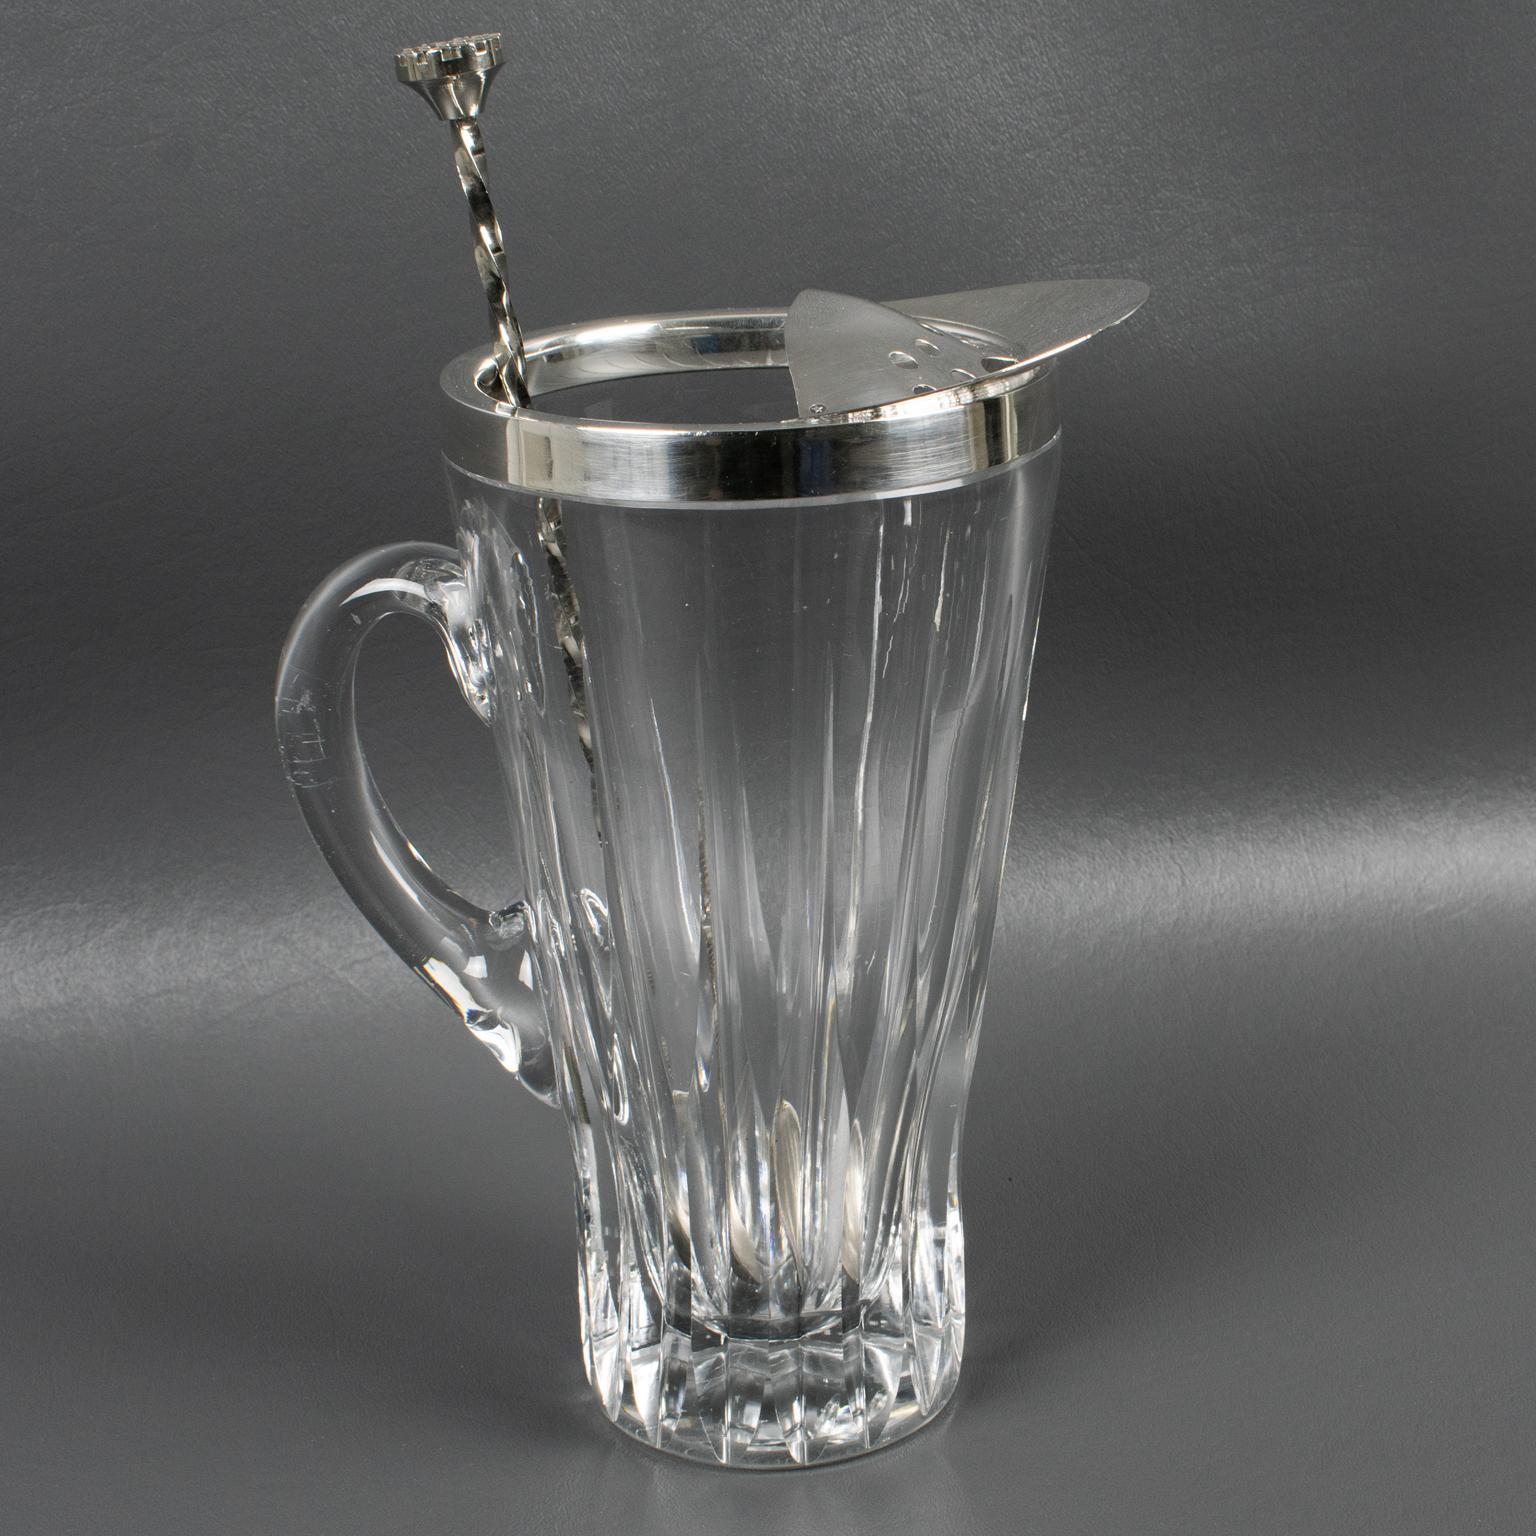 Art Deco Silver Plate and Crystal Barware Cocktail Martini Pitcher with Stirrer